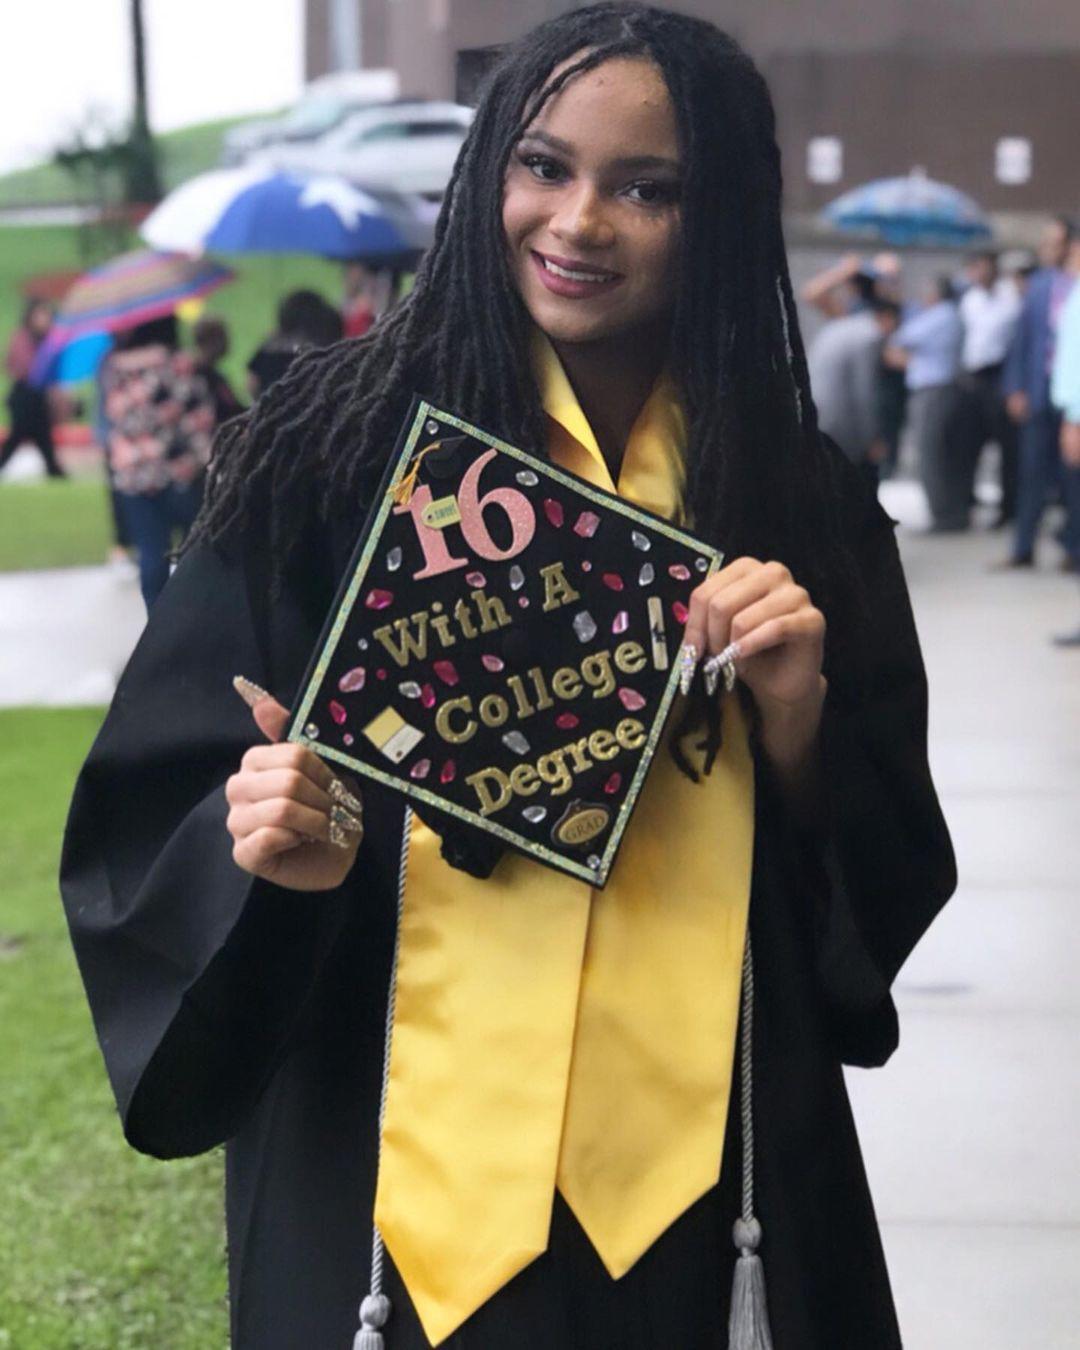 Salenah Cartier earned her associate's degree in biology from Lone Star College-Kingwood at age 16. (Courtesy of <a href="https://www.instagram.com/salenahcartier/">Salenah Cartier</a>)